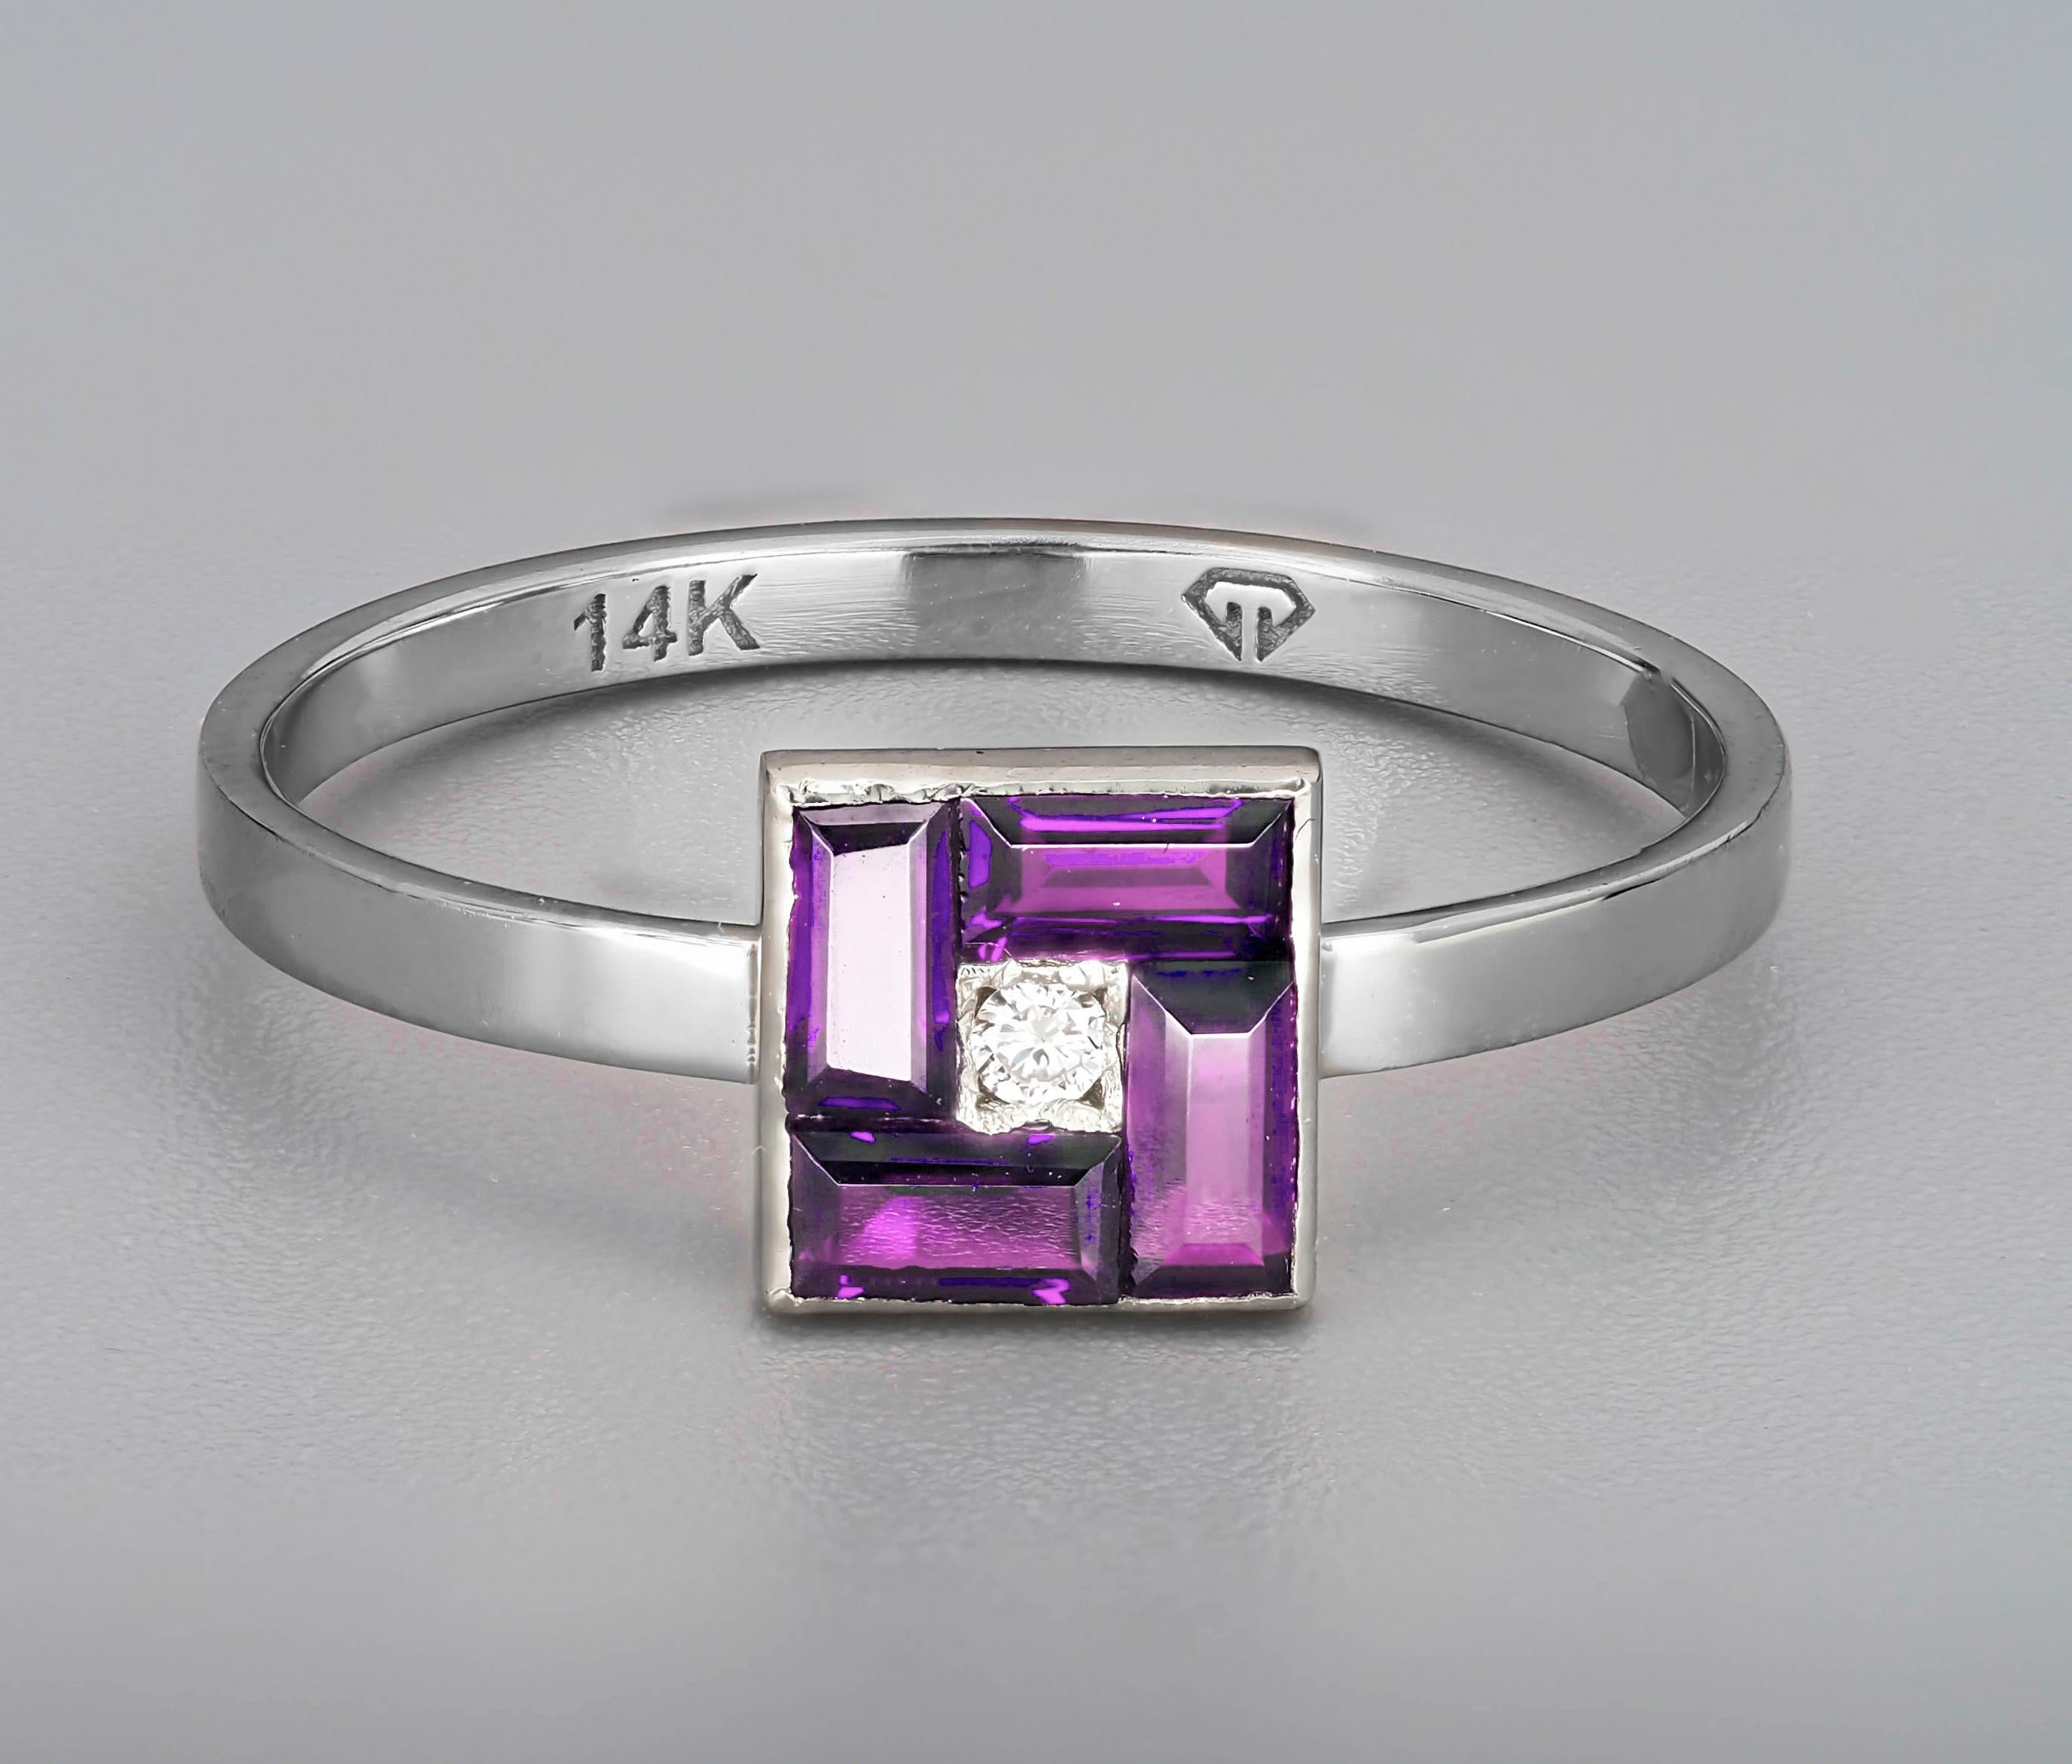 Purple baguette 14k gold ring.
Baguette lab amethyst 14k gold ring. Delicate amethyst ring. Purple gem ring. February birthstone ring. Minimalist gold ring. Square gold ring.

Metal: 14k gold
Weight: 1.5gr depends from size

Gemstones:
1.Lab